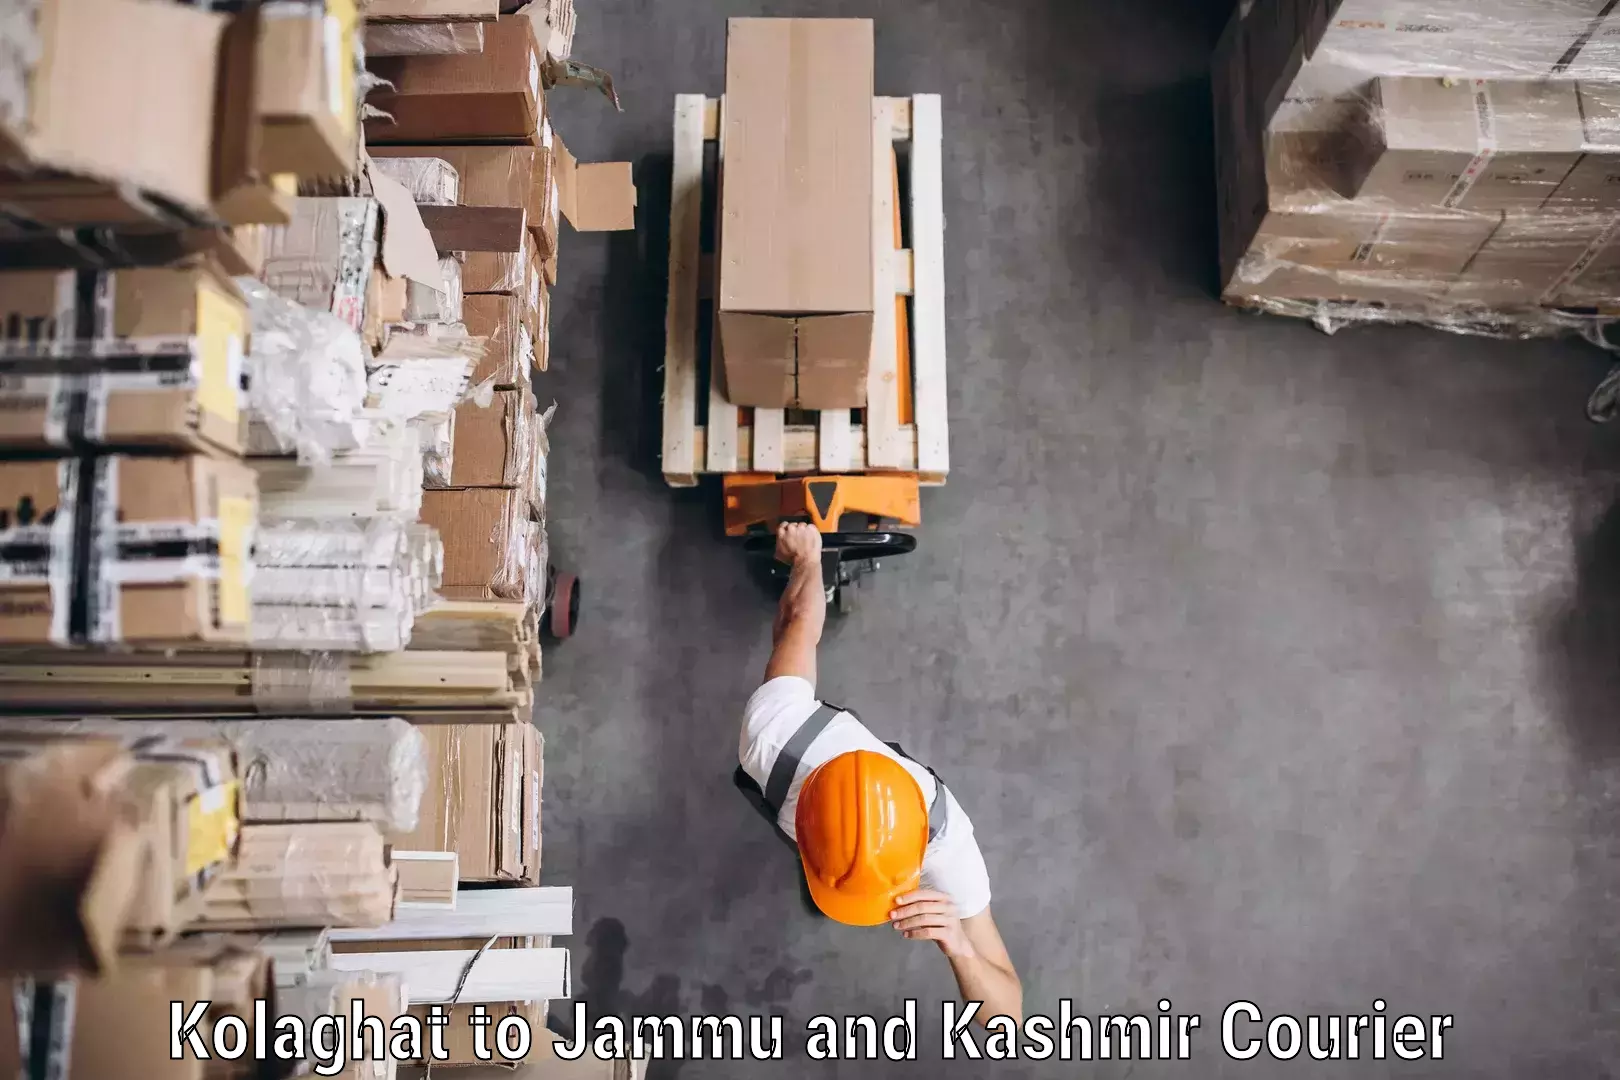 Nationwide shipping capabilities in Kolaghat to Bhaderwah